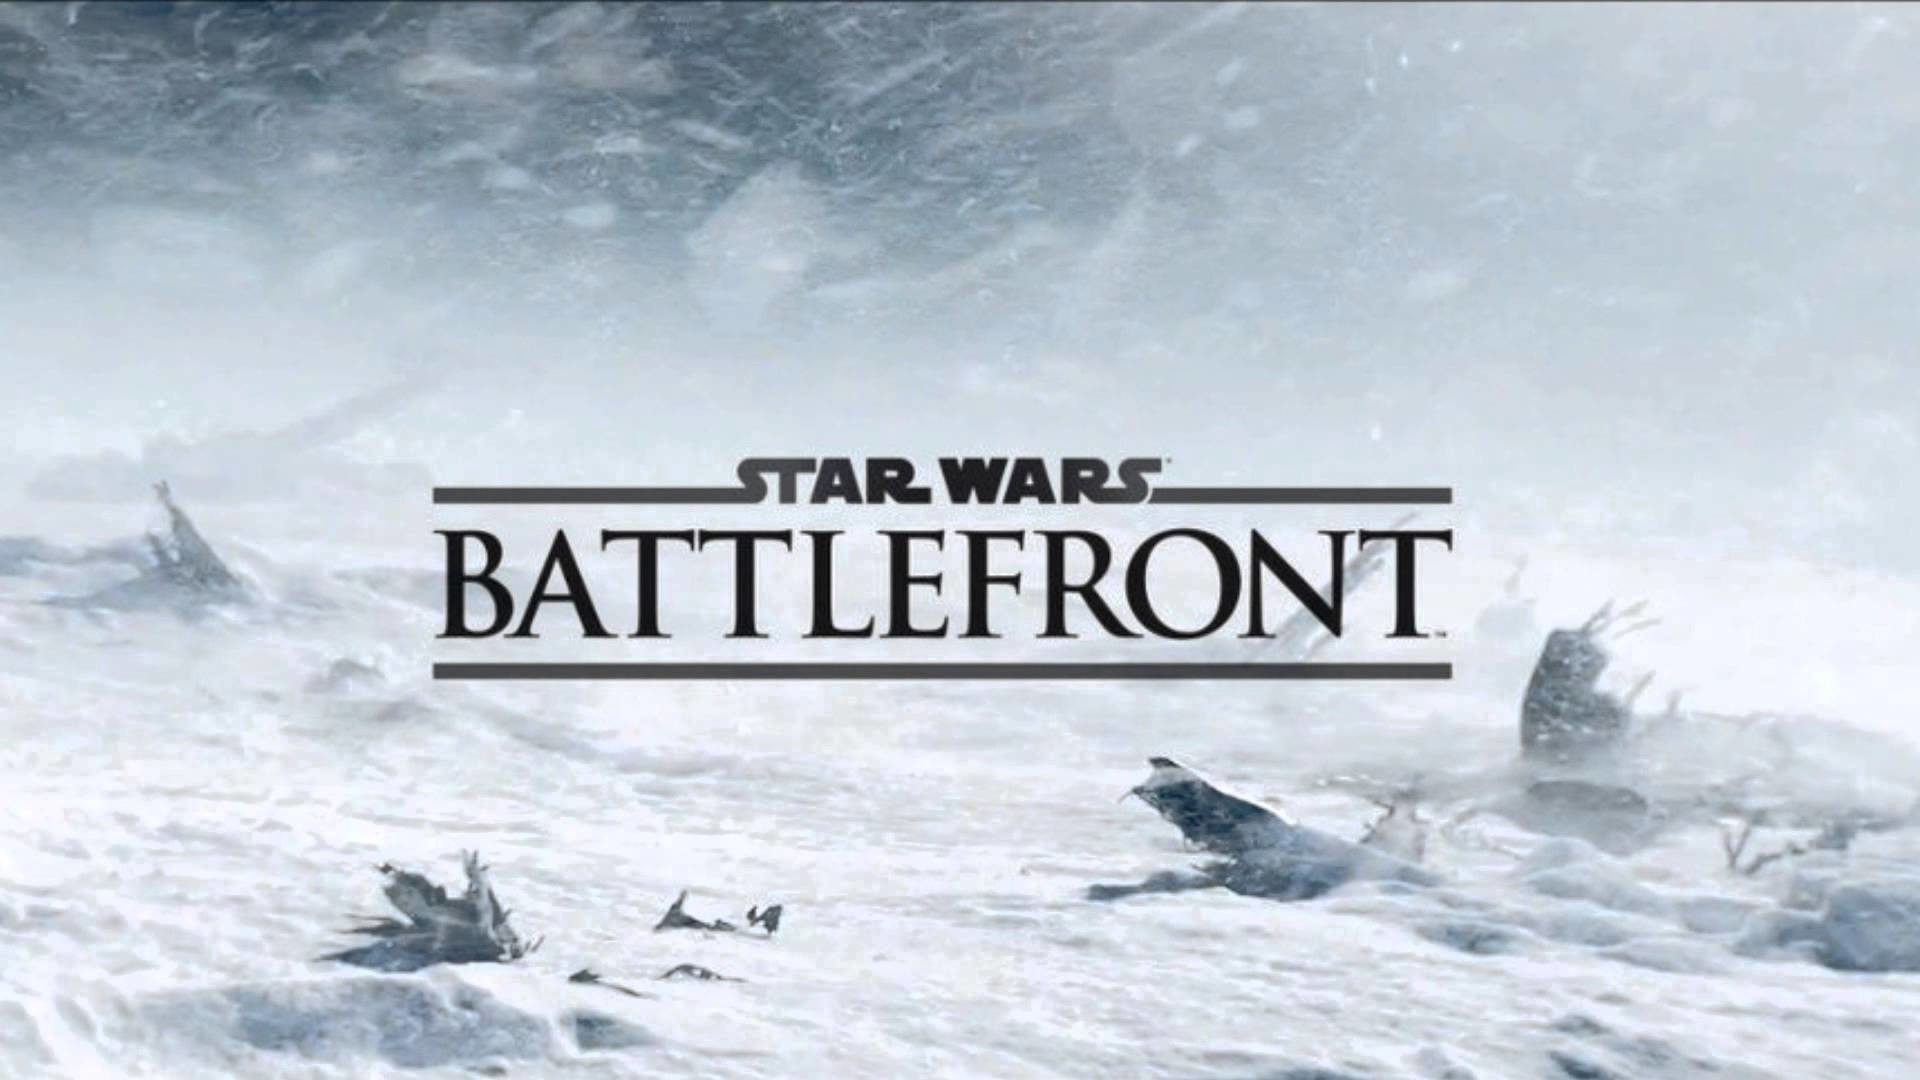 1920x1080 Star Wars Battlefront Gets New Smartphone Wallpapers; Downloadable Images  Inside | The Games Cabin